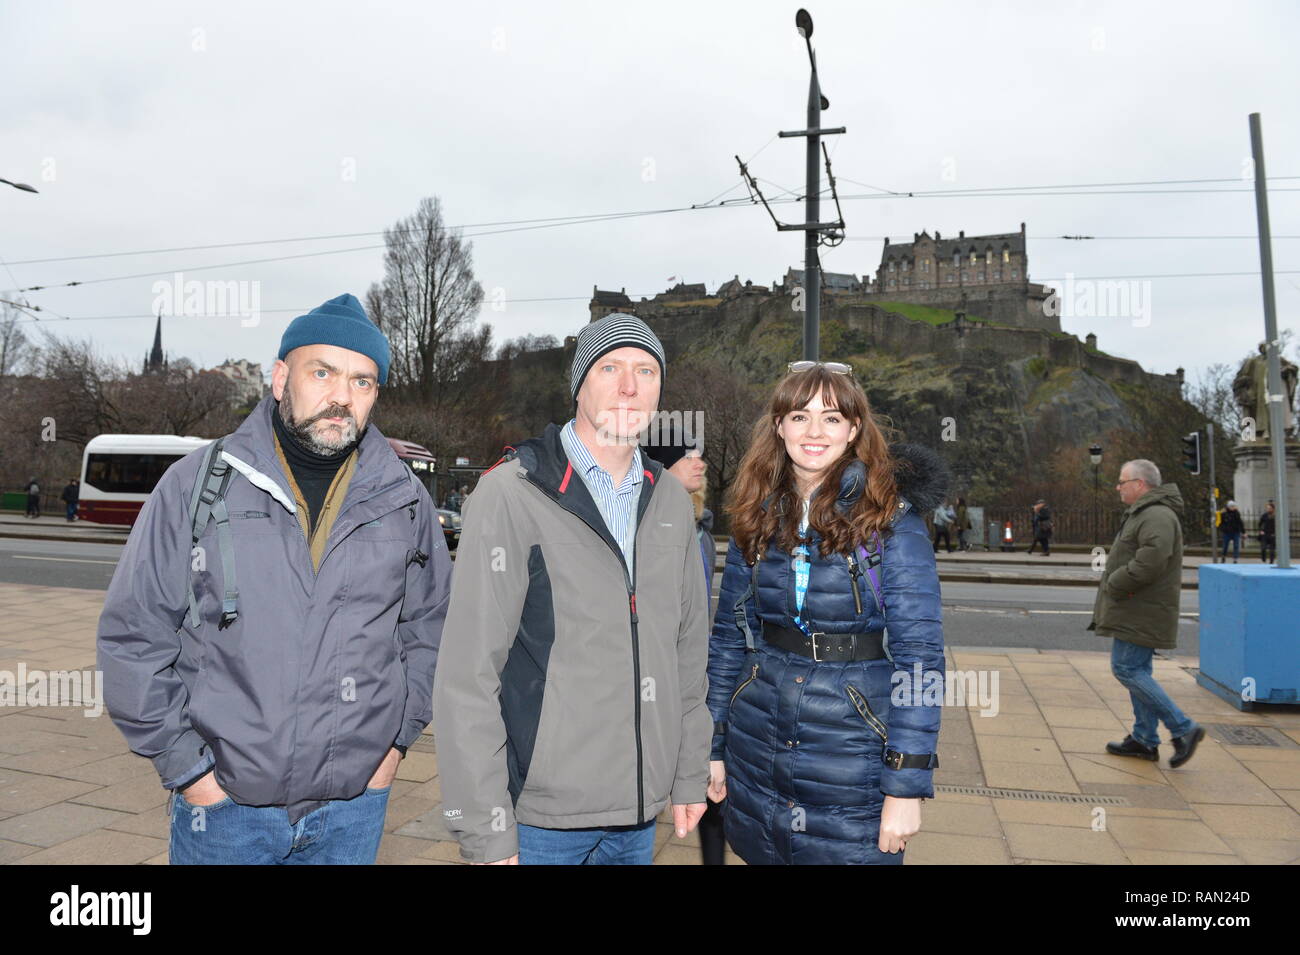 Edinburgh, Scotland, UK. 4th January, 2019. Public Health Minister Joe FitzPatrick joins the Edinburgh Access Practice Street Outreach Pharmacist on a walkabout around Edinburgh. The service provides essential primary health care for homeless patients (Left - Right: David Miller - Streetwork Councillor; Joe FitzPatrick - Public Health Minister; Lauren Gibson - Outreach Pharmacist). Edinburgh, UK - 4th January 2019. Credit: Colin Fisher/Alamy Live News Stock Photo